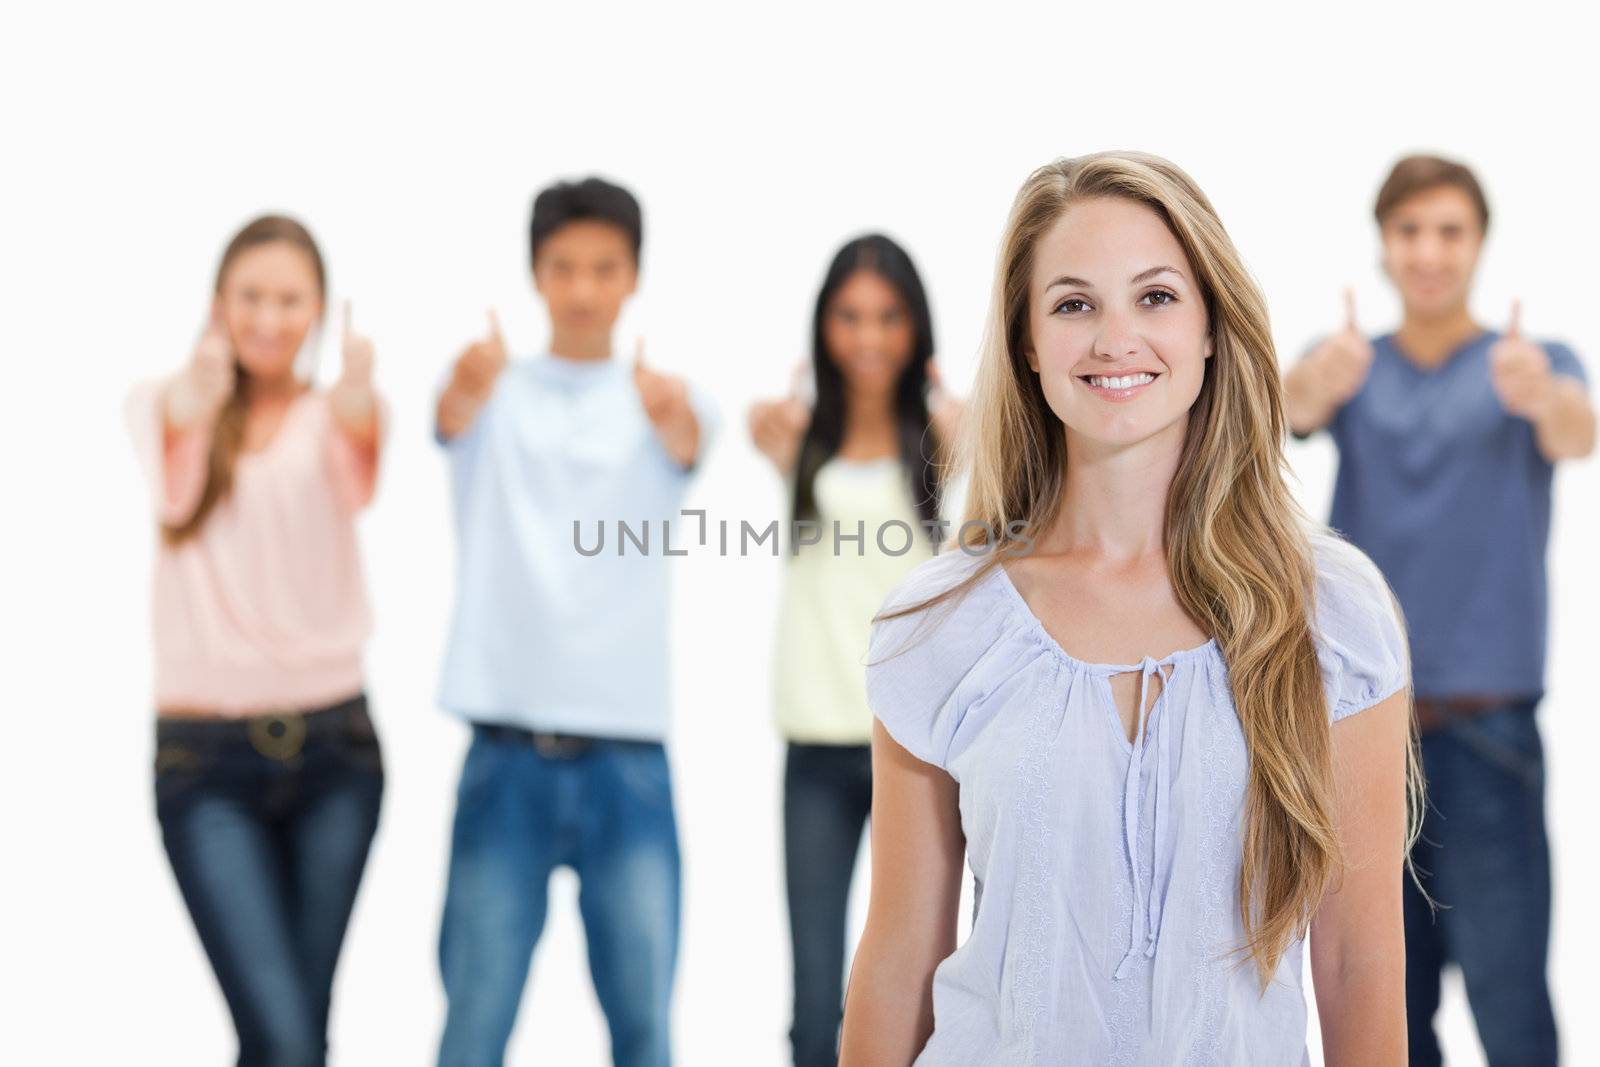 Close-up of woman smiling with people approving behind her against white background